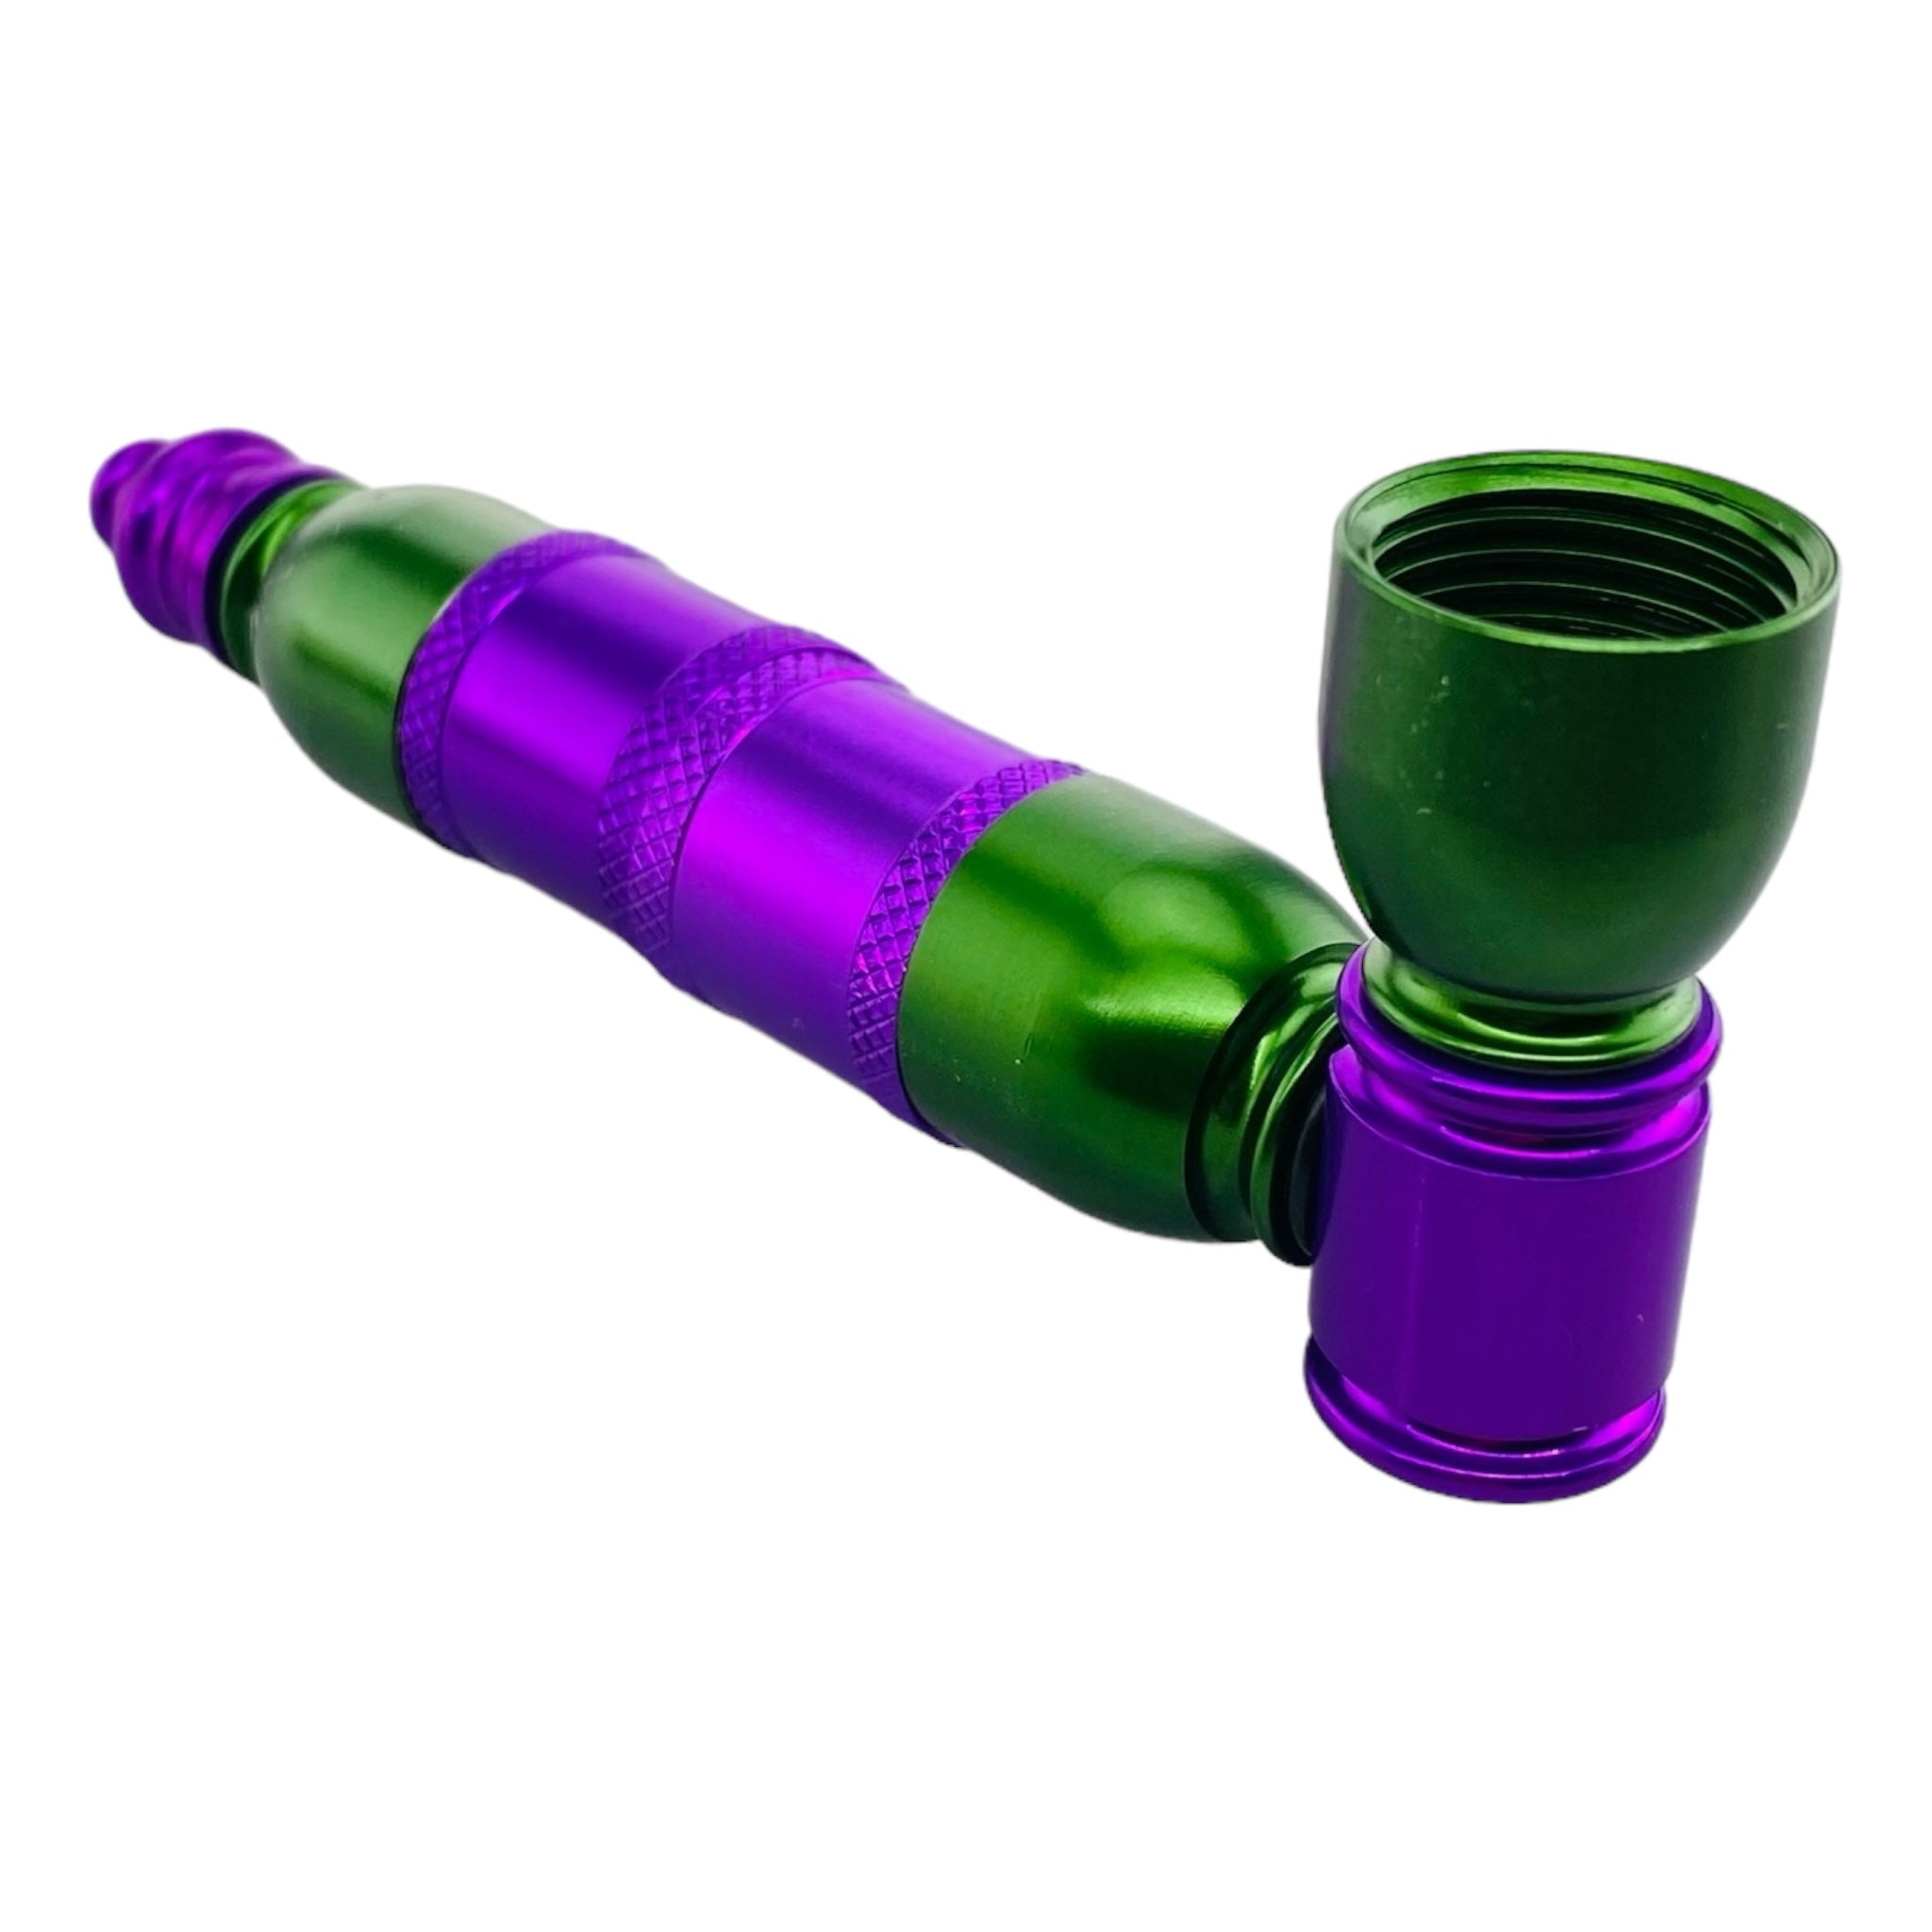 aluminum metal hand pipe for smoking weed pot cannabis or tobacco with multiple chambers for sale